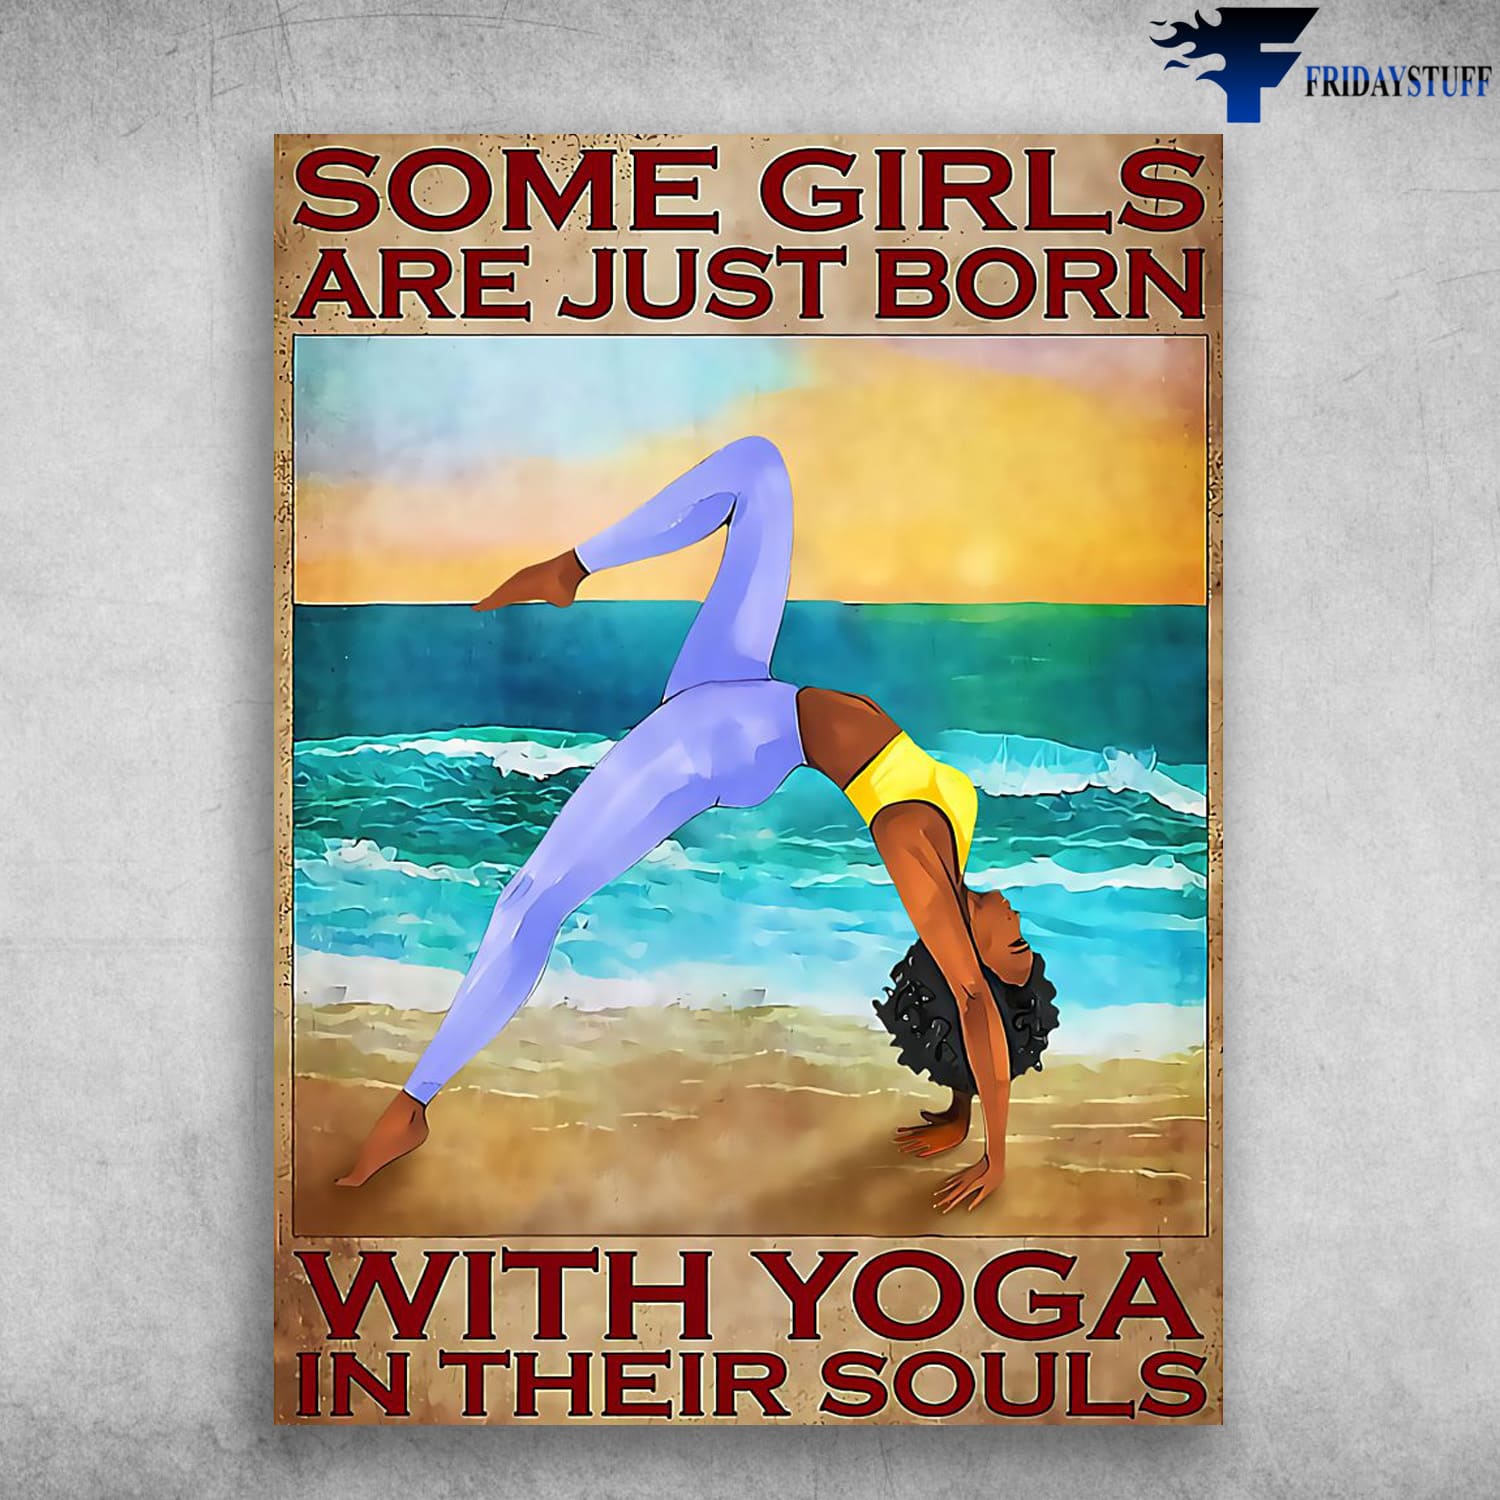 Yoga Girl, Yoga On The Beach, Some Girls Are Just Born, With Yoga In Their Souls